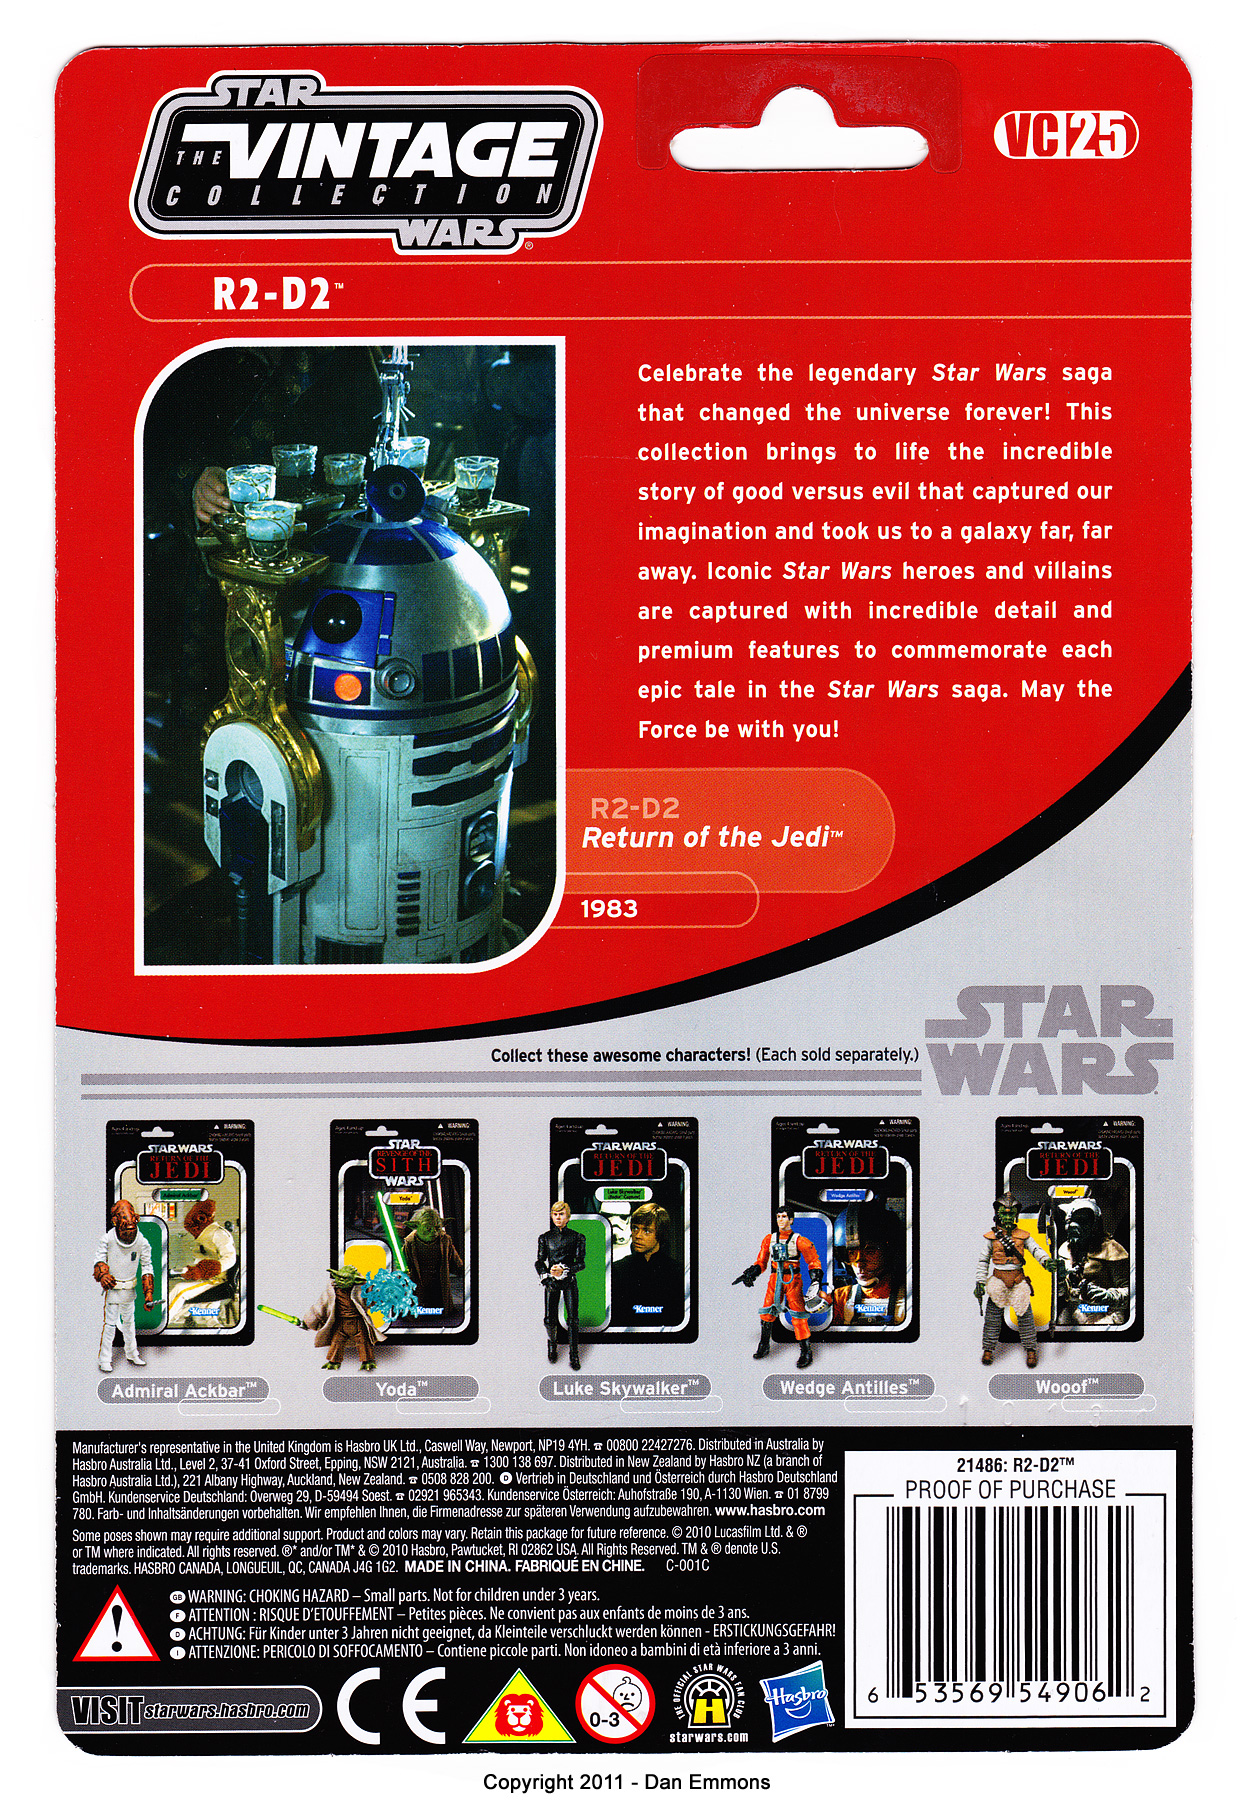 The Vintage Collection - VC25: R2-D2 - Variation - Modern Card Front Images Shown On Back Of Card